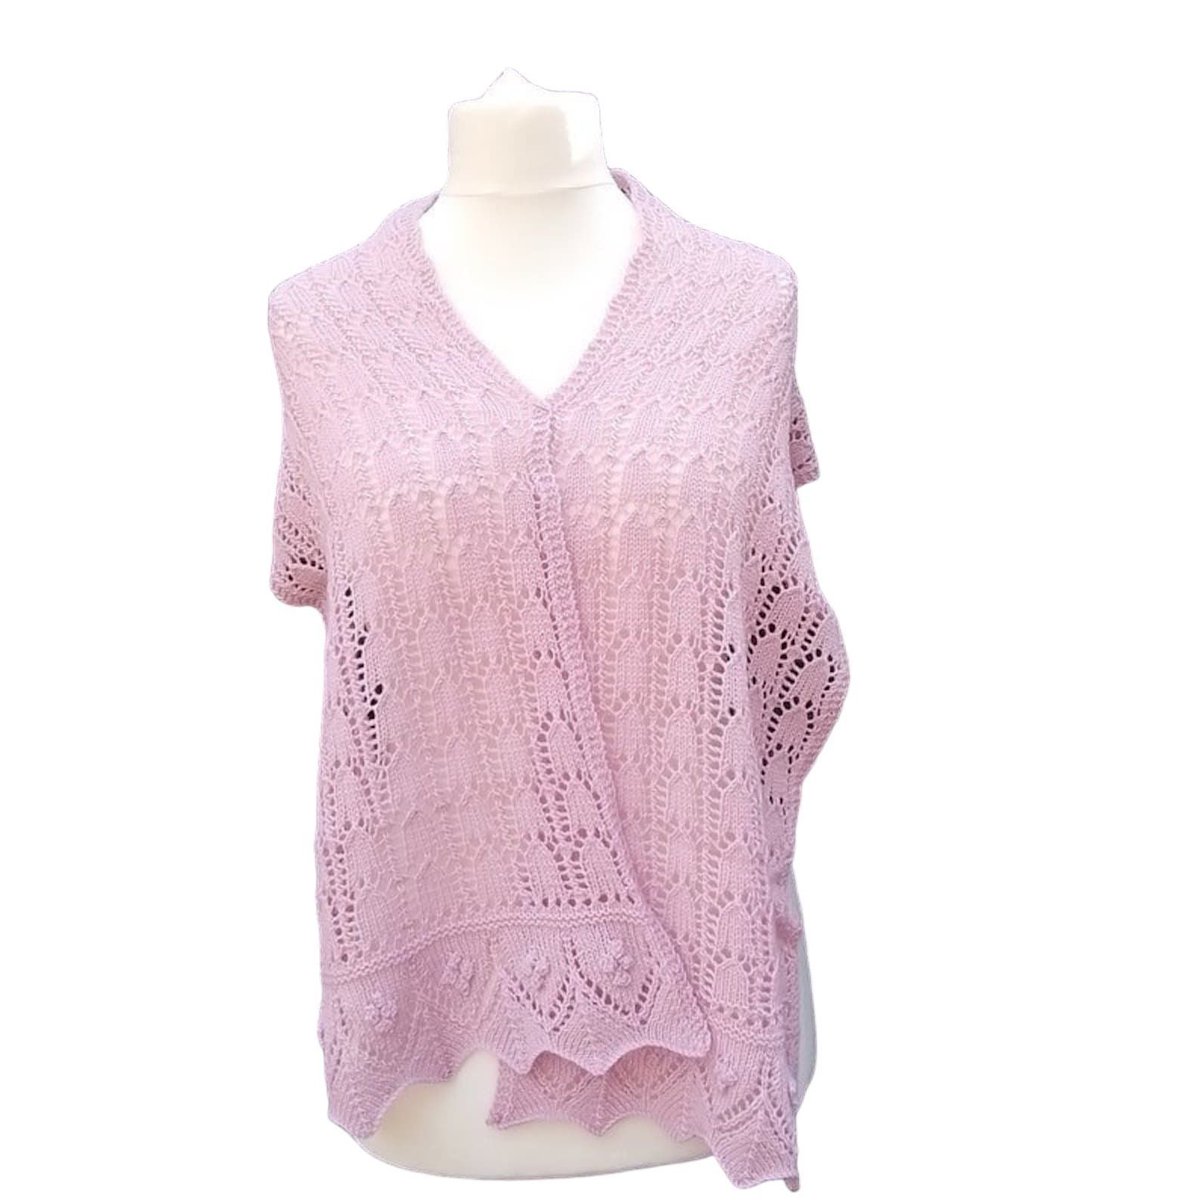 Check out this beautiful hand-knitted lacy shawl in light pink alpaca and wool mixed yarn! It's perfect for adding a touch of elegance to any outfit. Get yours today from #Knittingtopia on #Etsy knittingtopia.etsy.com/listing/167996… #knittedshawl #ladiesshawl #handmade #MHHSBD #craftbizparty